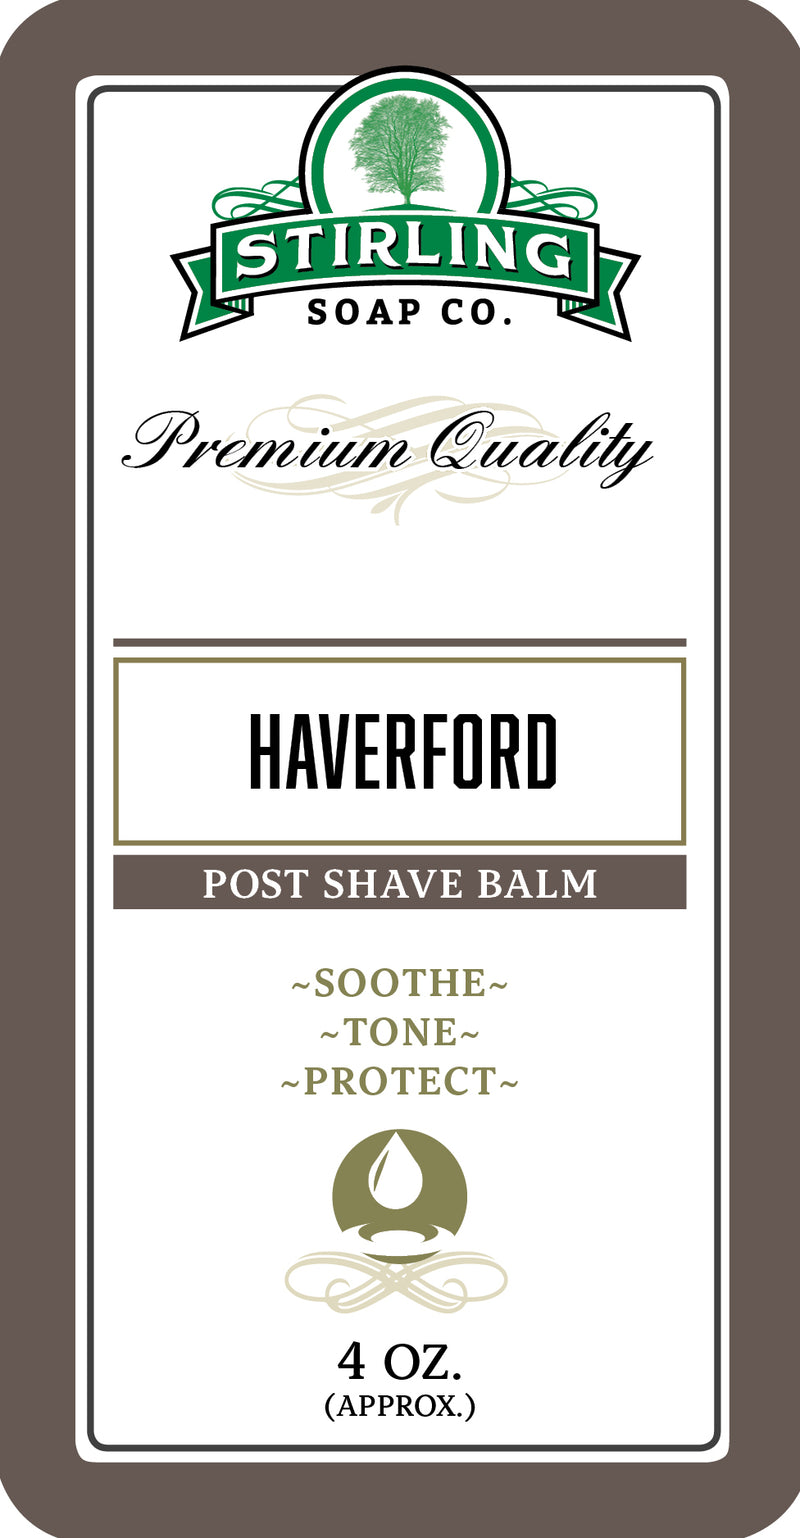 Haverford - Post-Shave Balm